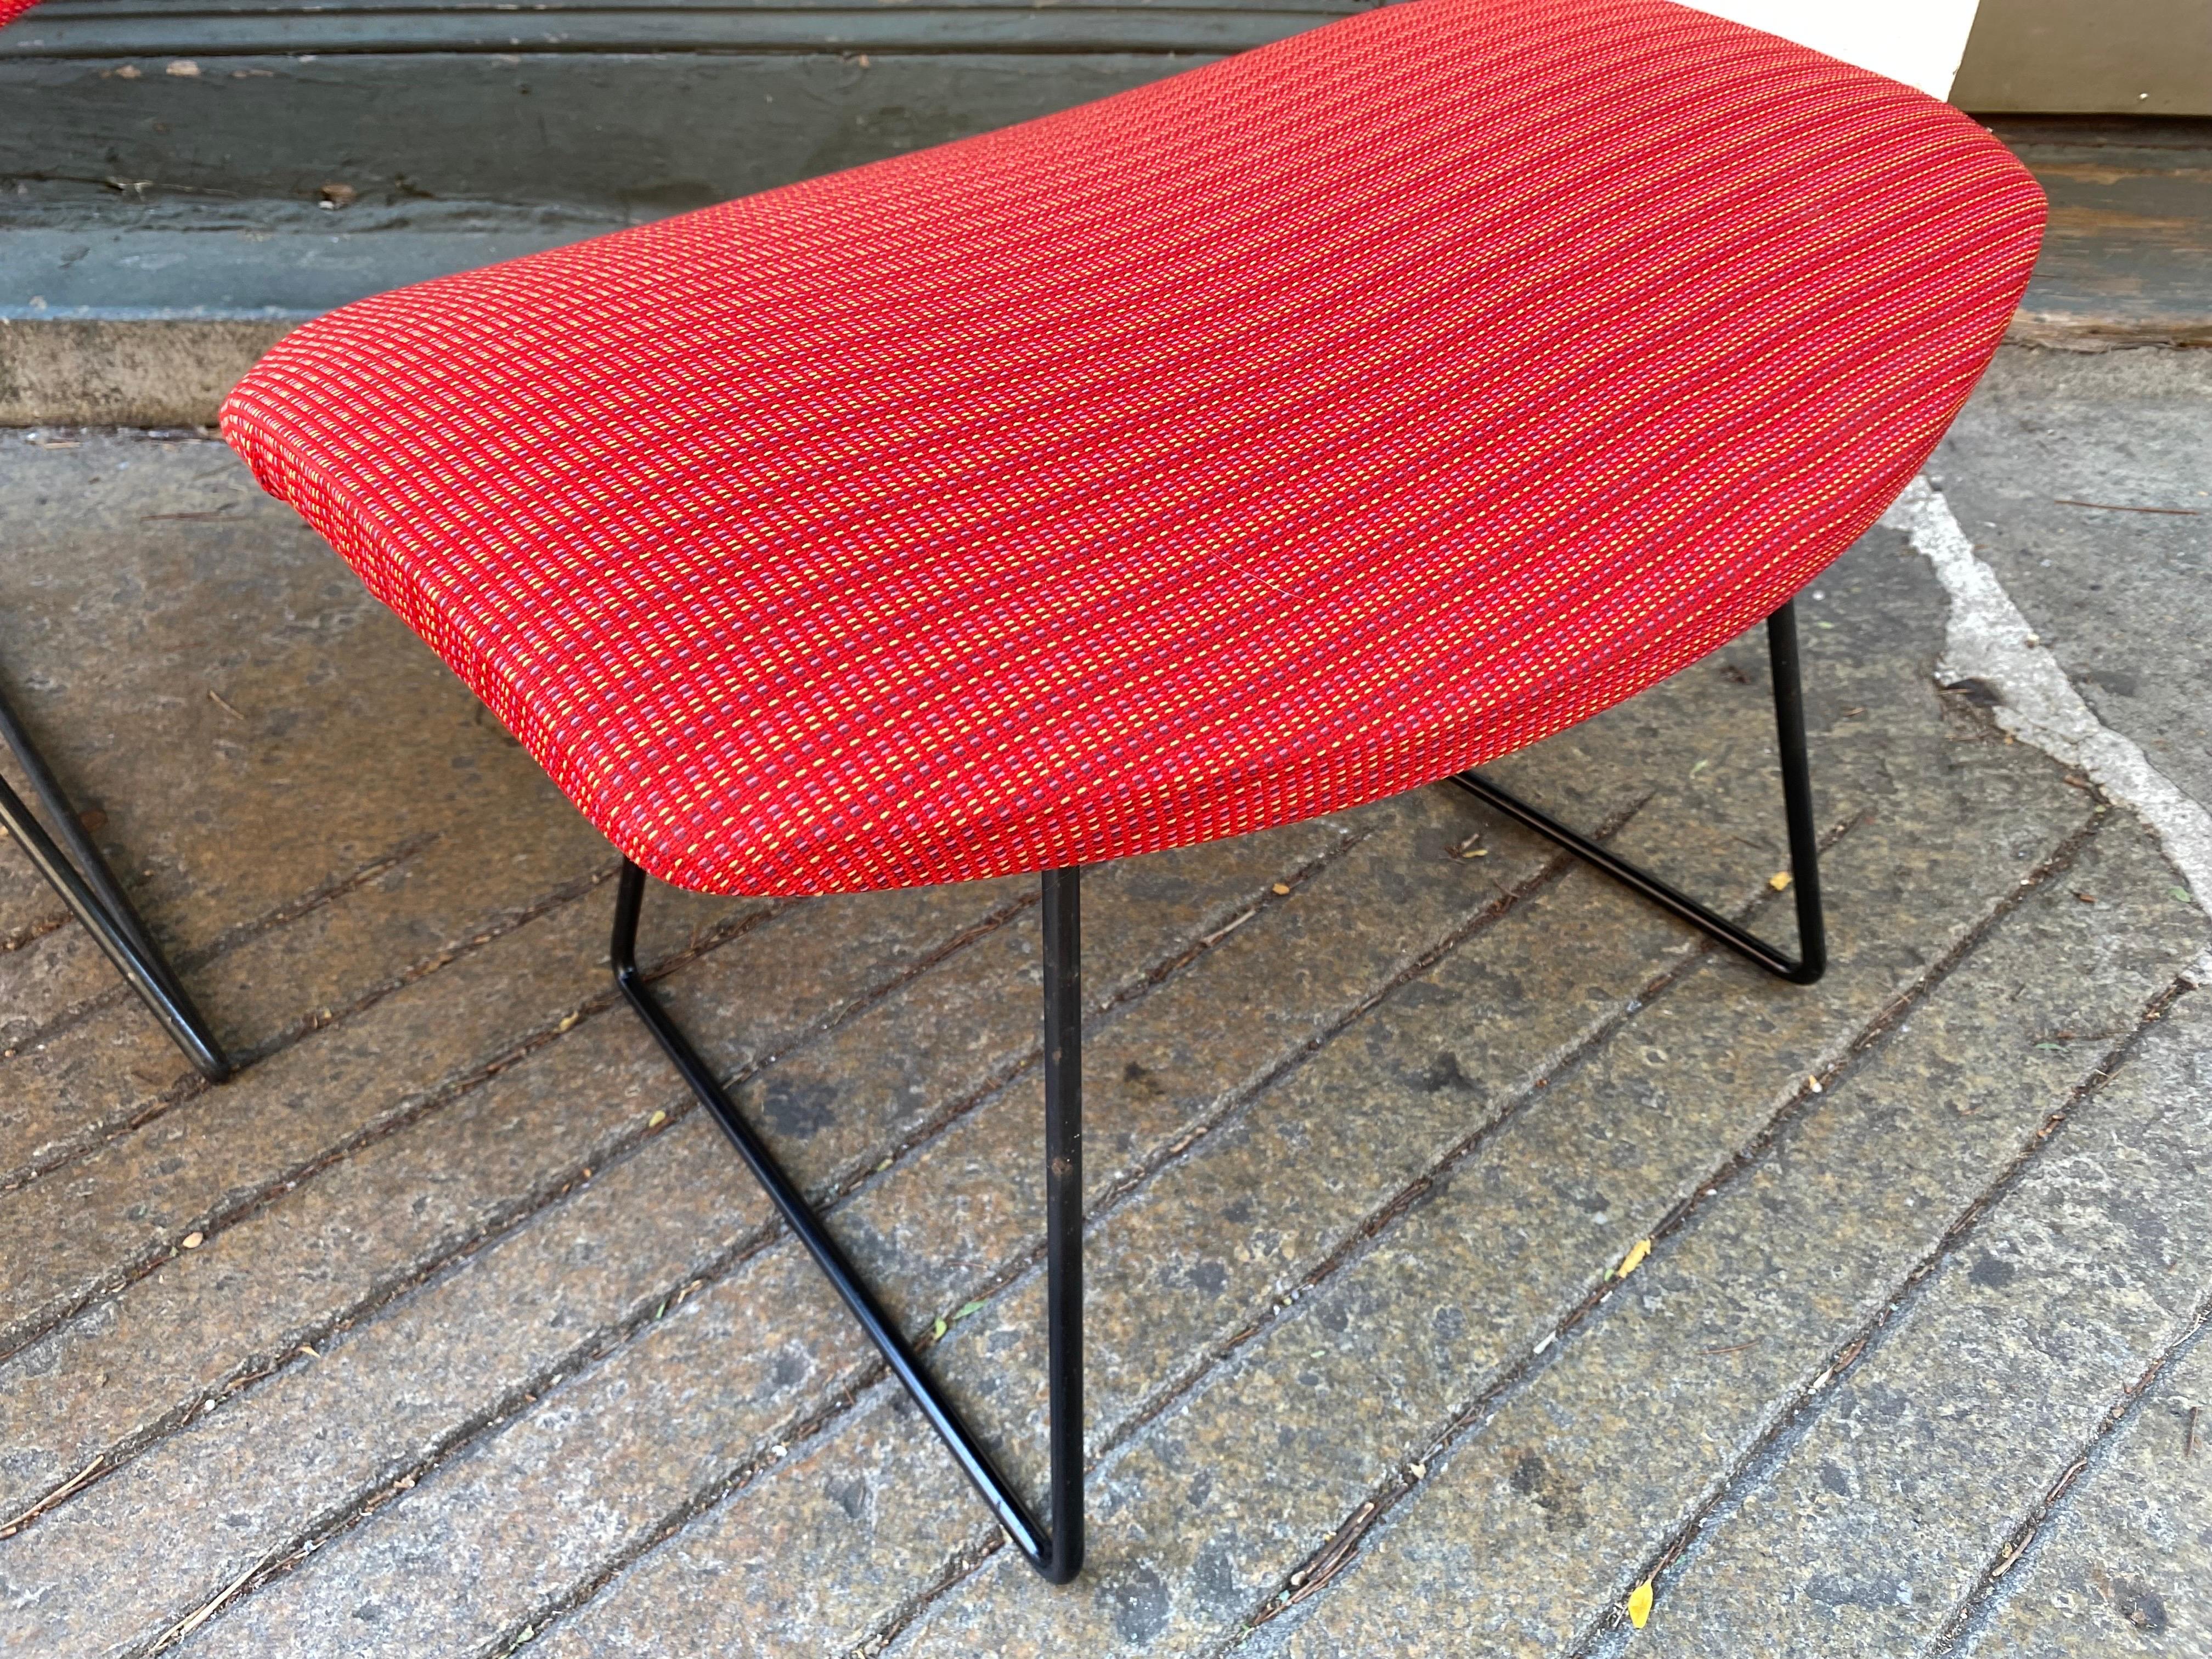 Metal Bertoia for Knoll Large Diamond Chair and Ottoman with New Knoll Cover!